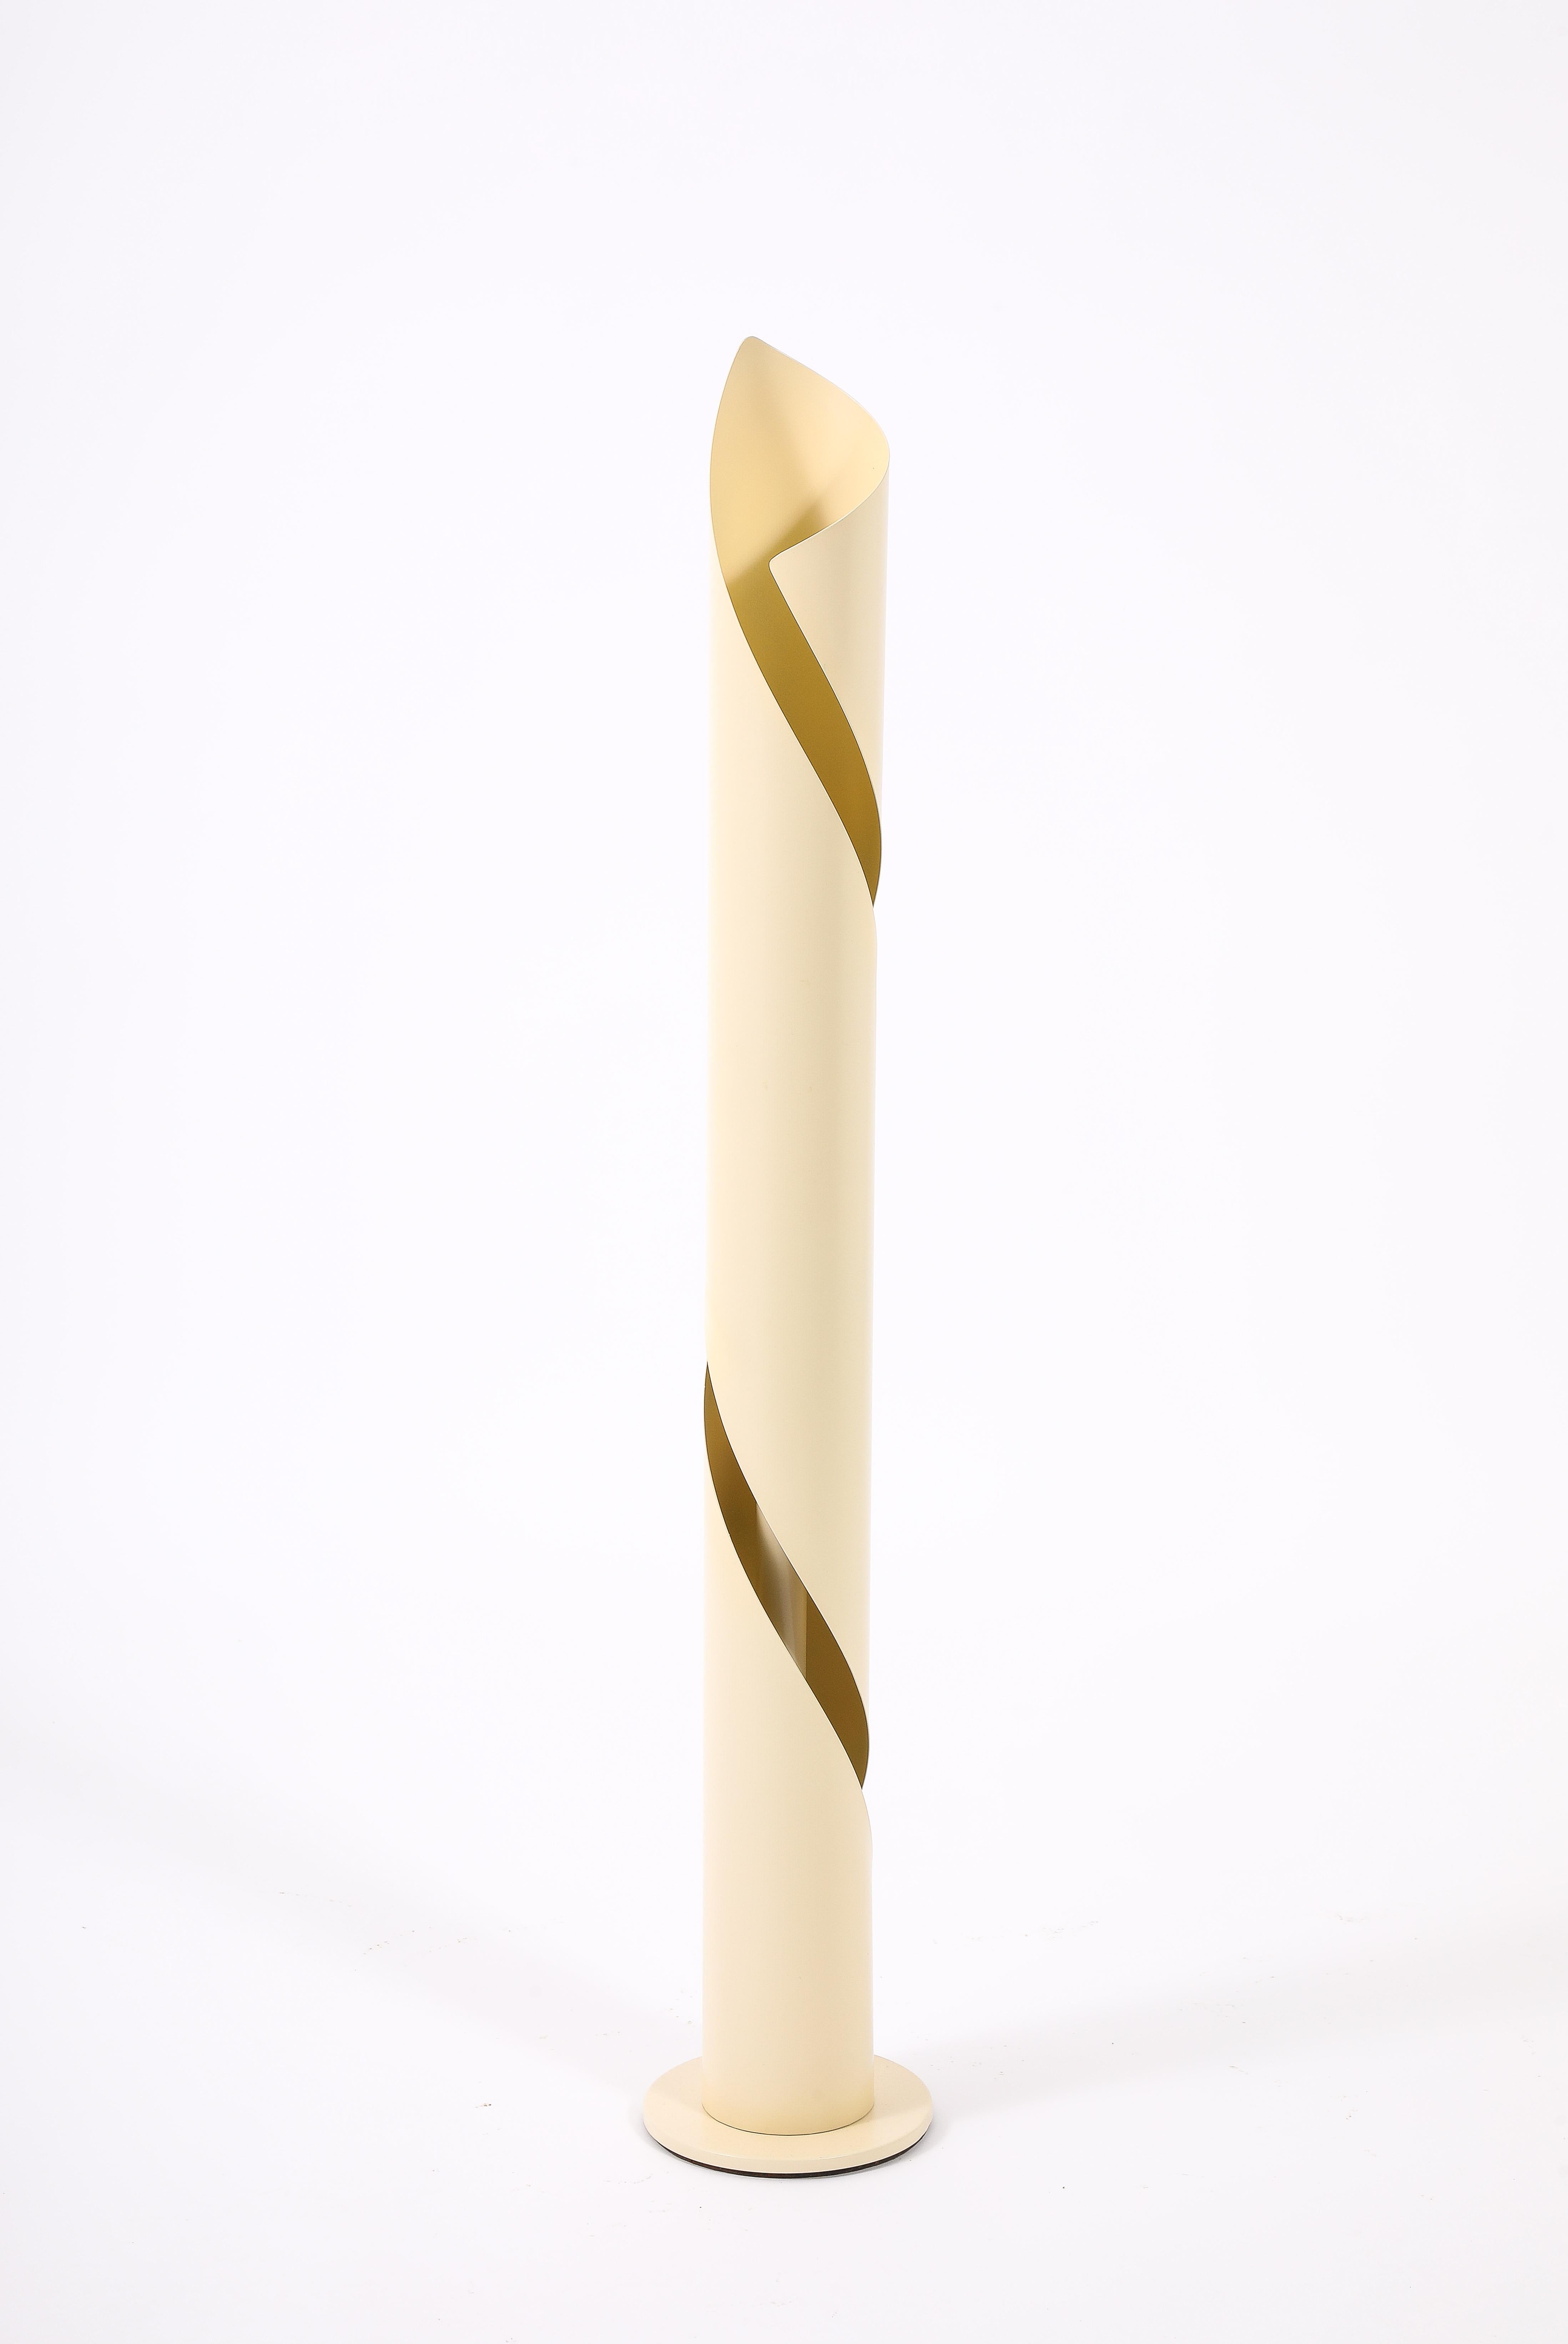 White Enameled Metal Spiral Floor Lamp, France 1970's In Good Condition For Sale In New York, NY